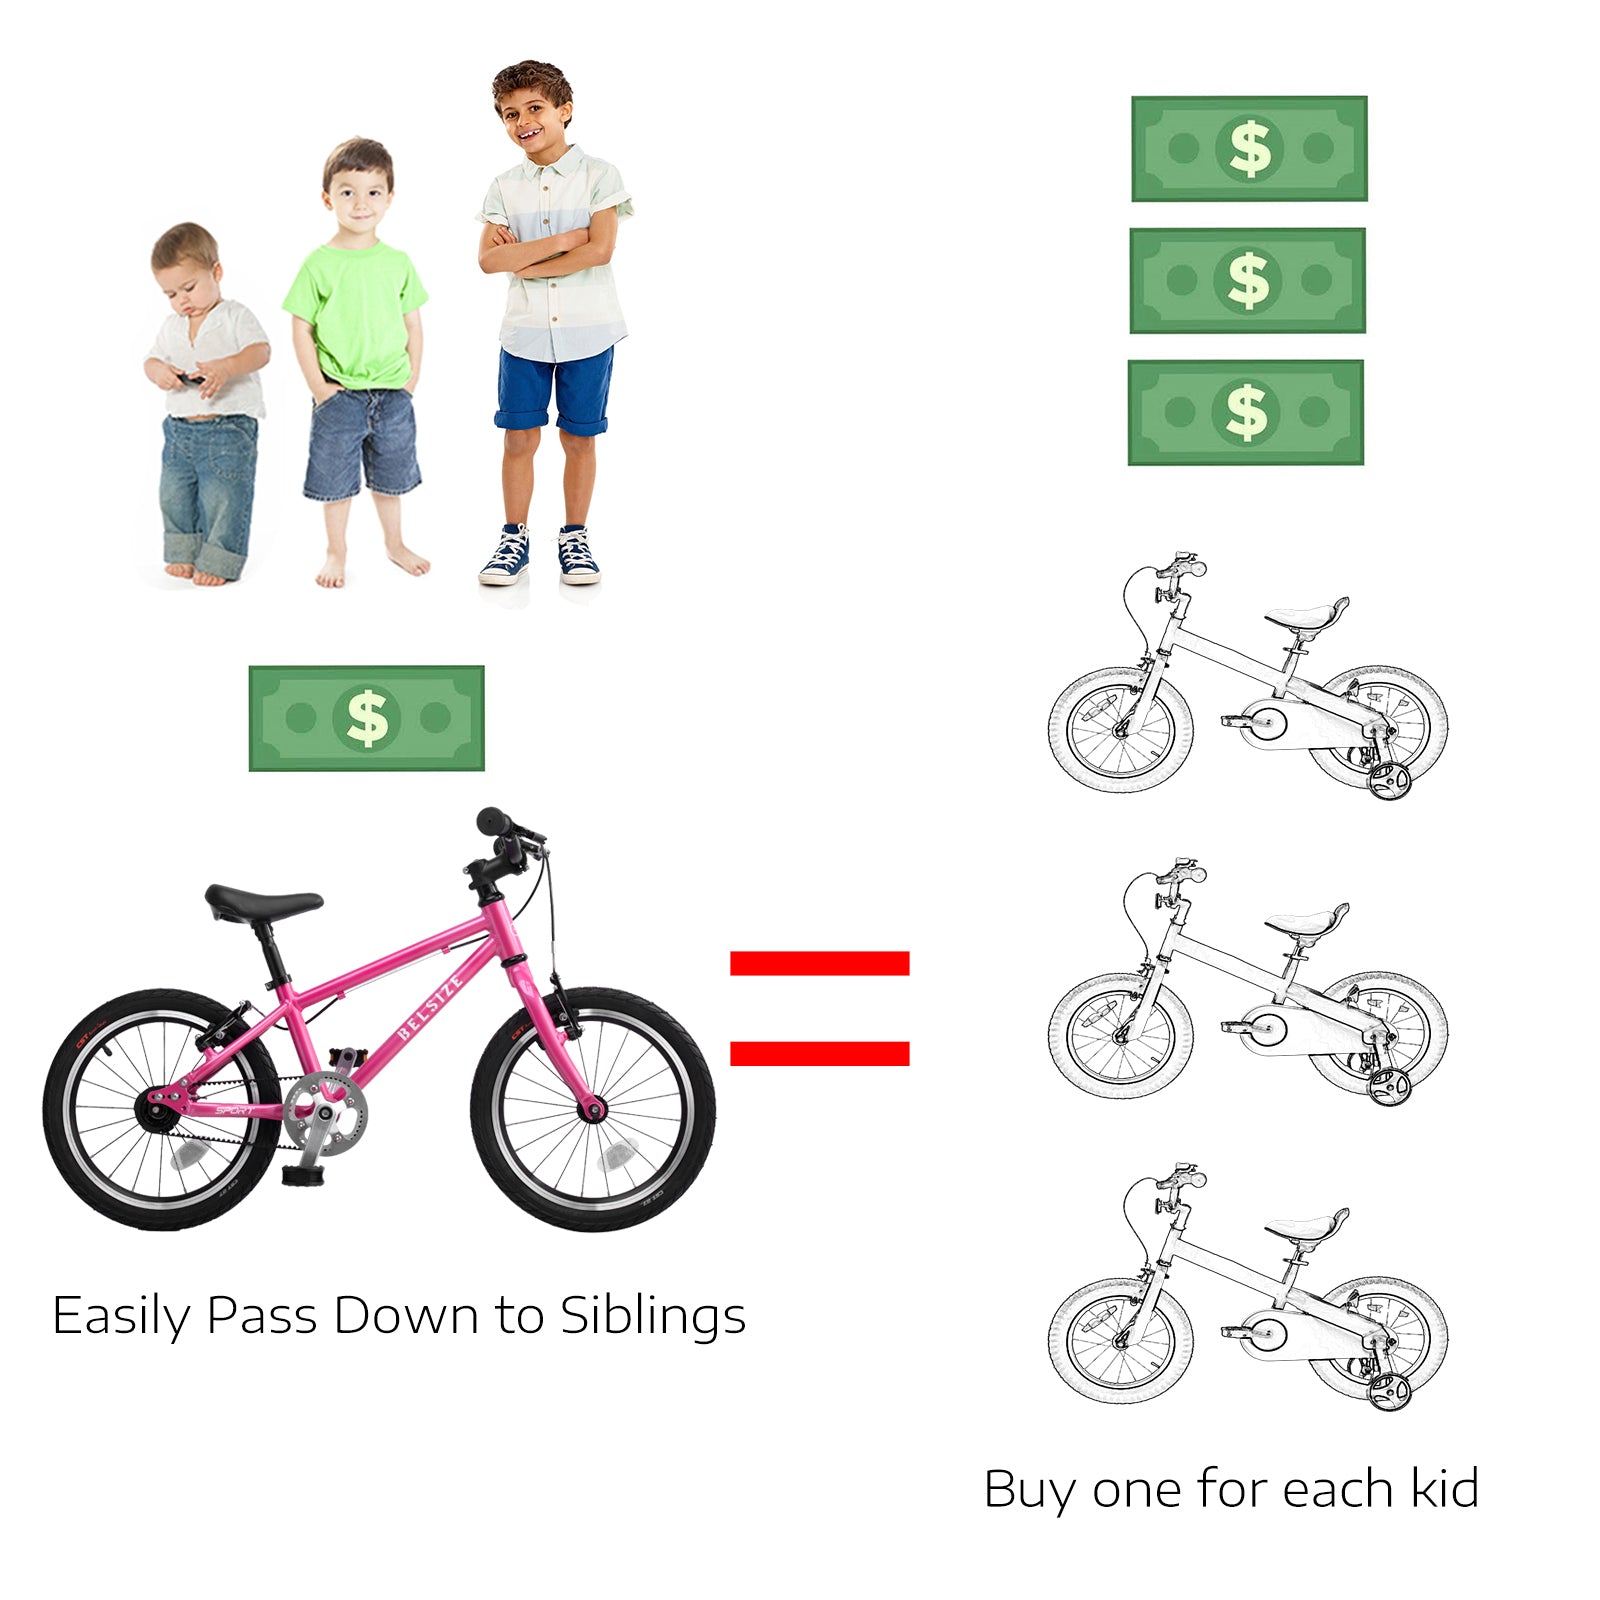 16-inch Sports Belt-Driven Kids' Bike - Belsize Official Sporting Goods > Outdoor Recreation > Cycling > Bicycles